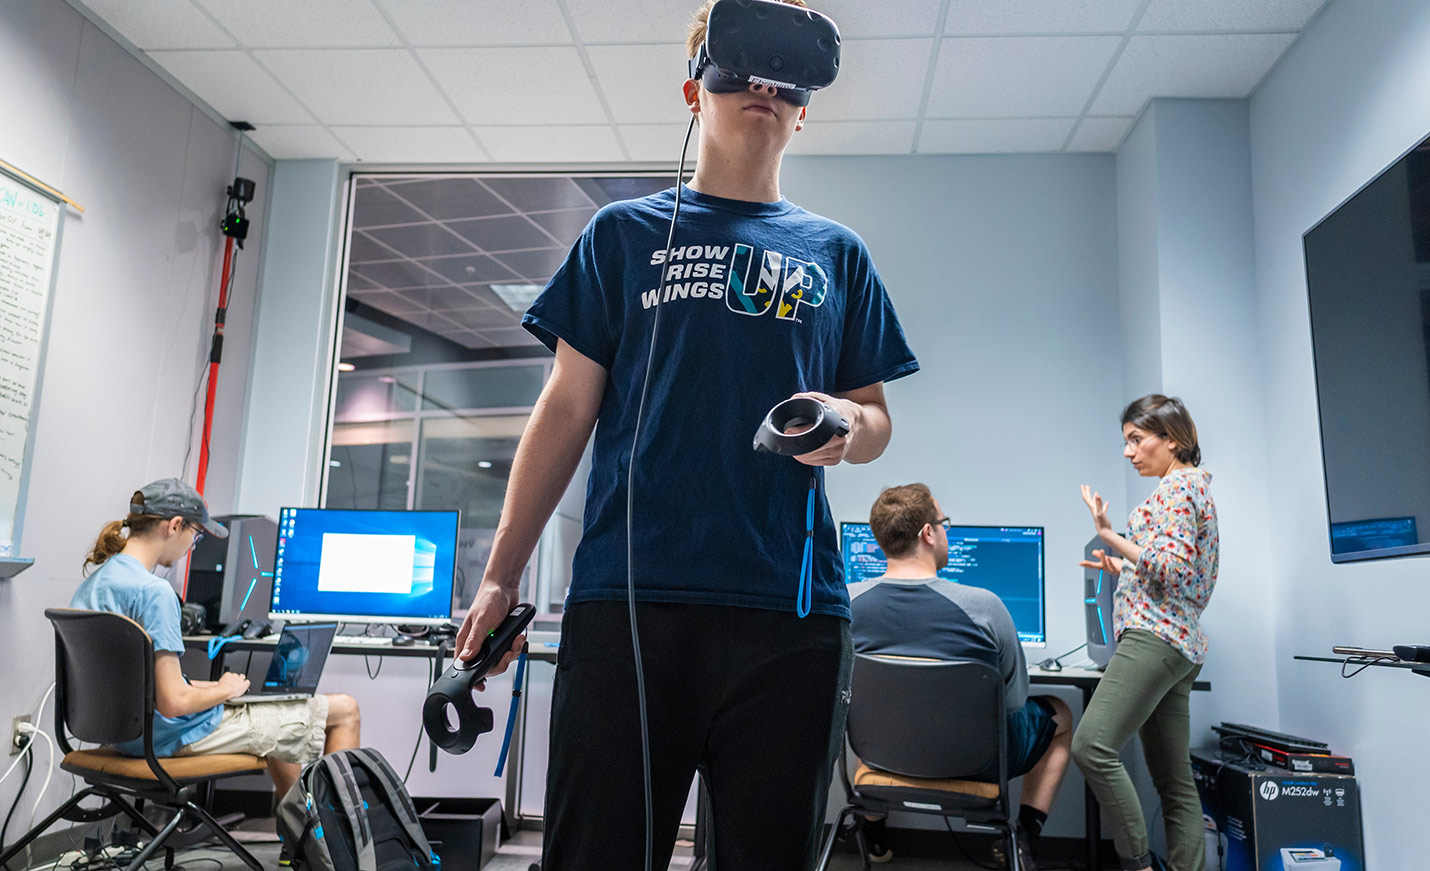 A student stands while wearing VR headset; two other students are seated at computers in the background